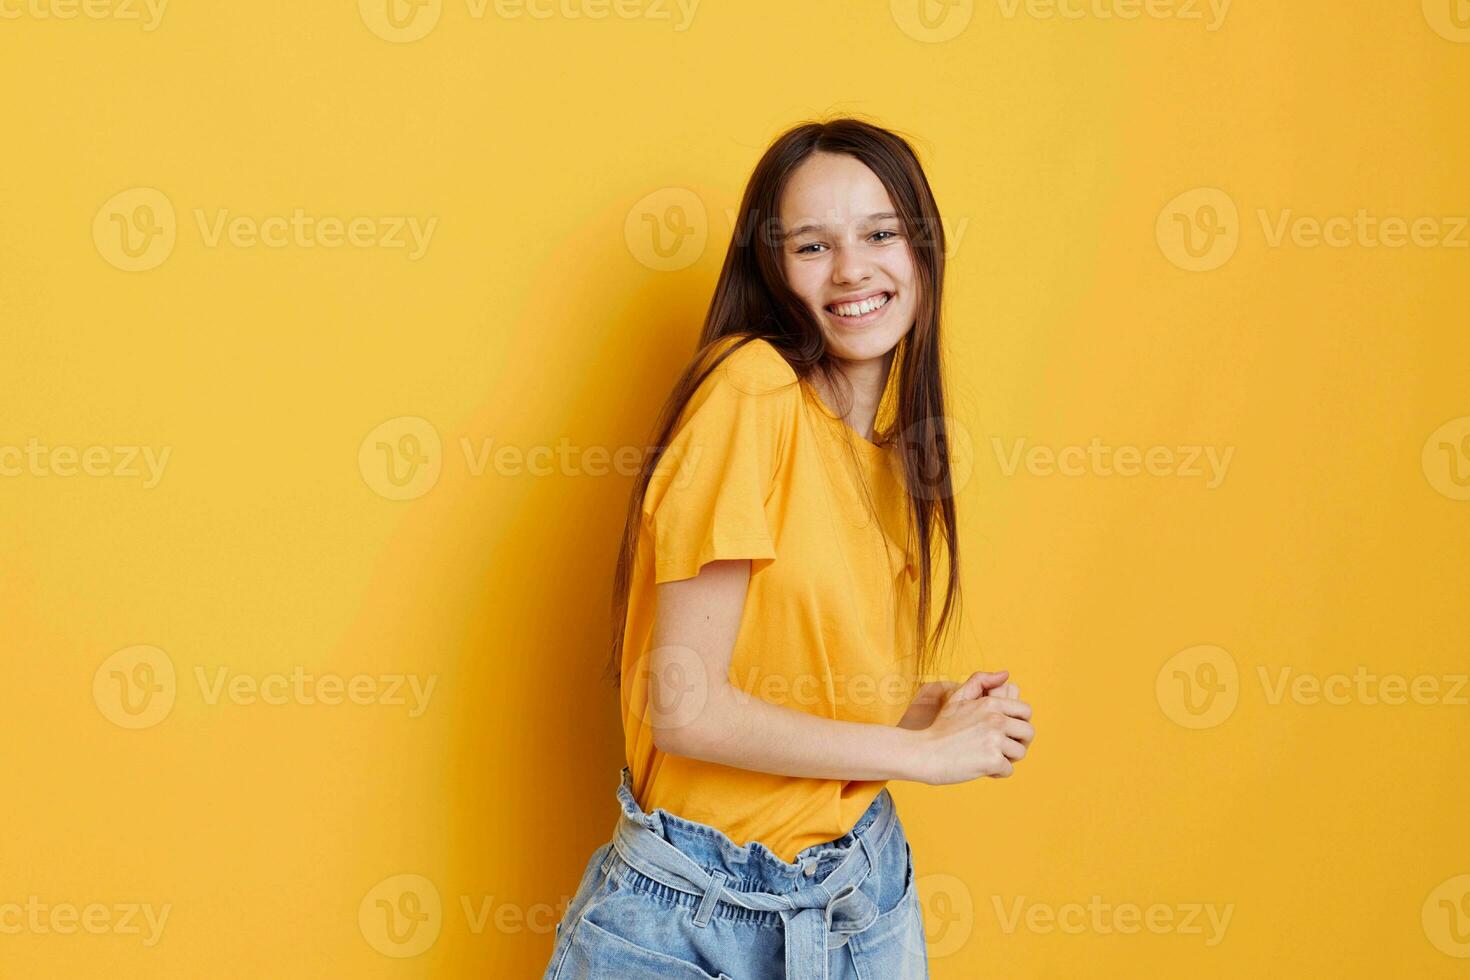 attractive woman in a yellow t-shirt emotions summer style yellow background photo